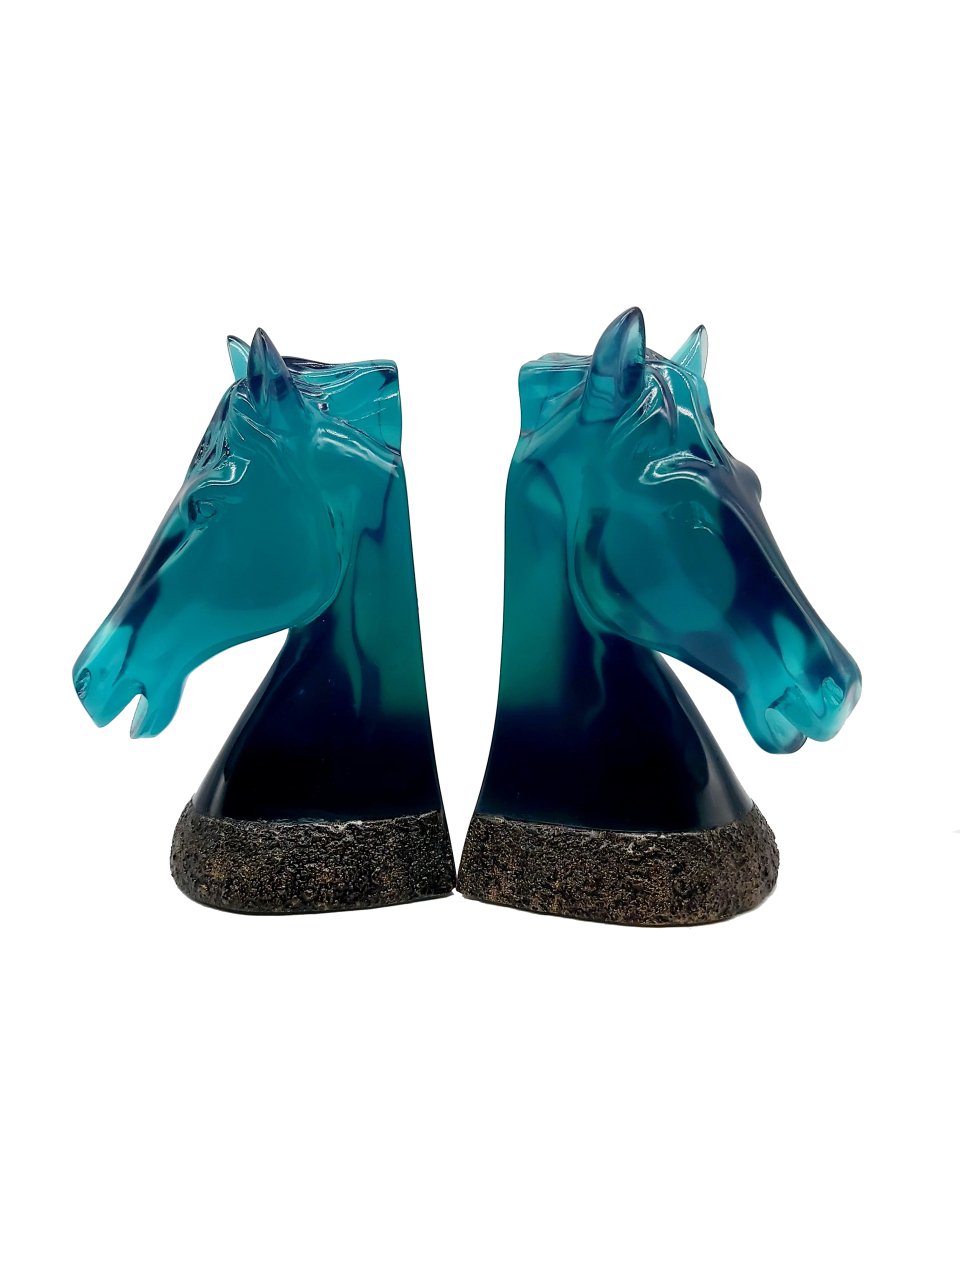 TURQUOISE HORSE BOOK HOLDER